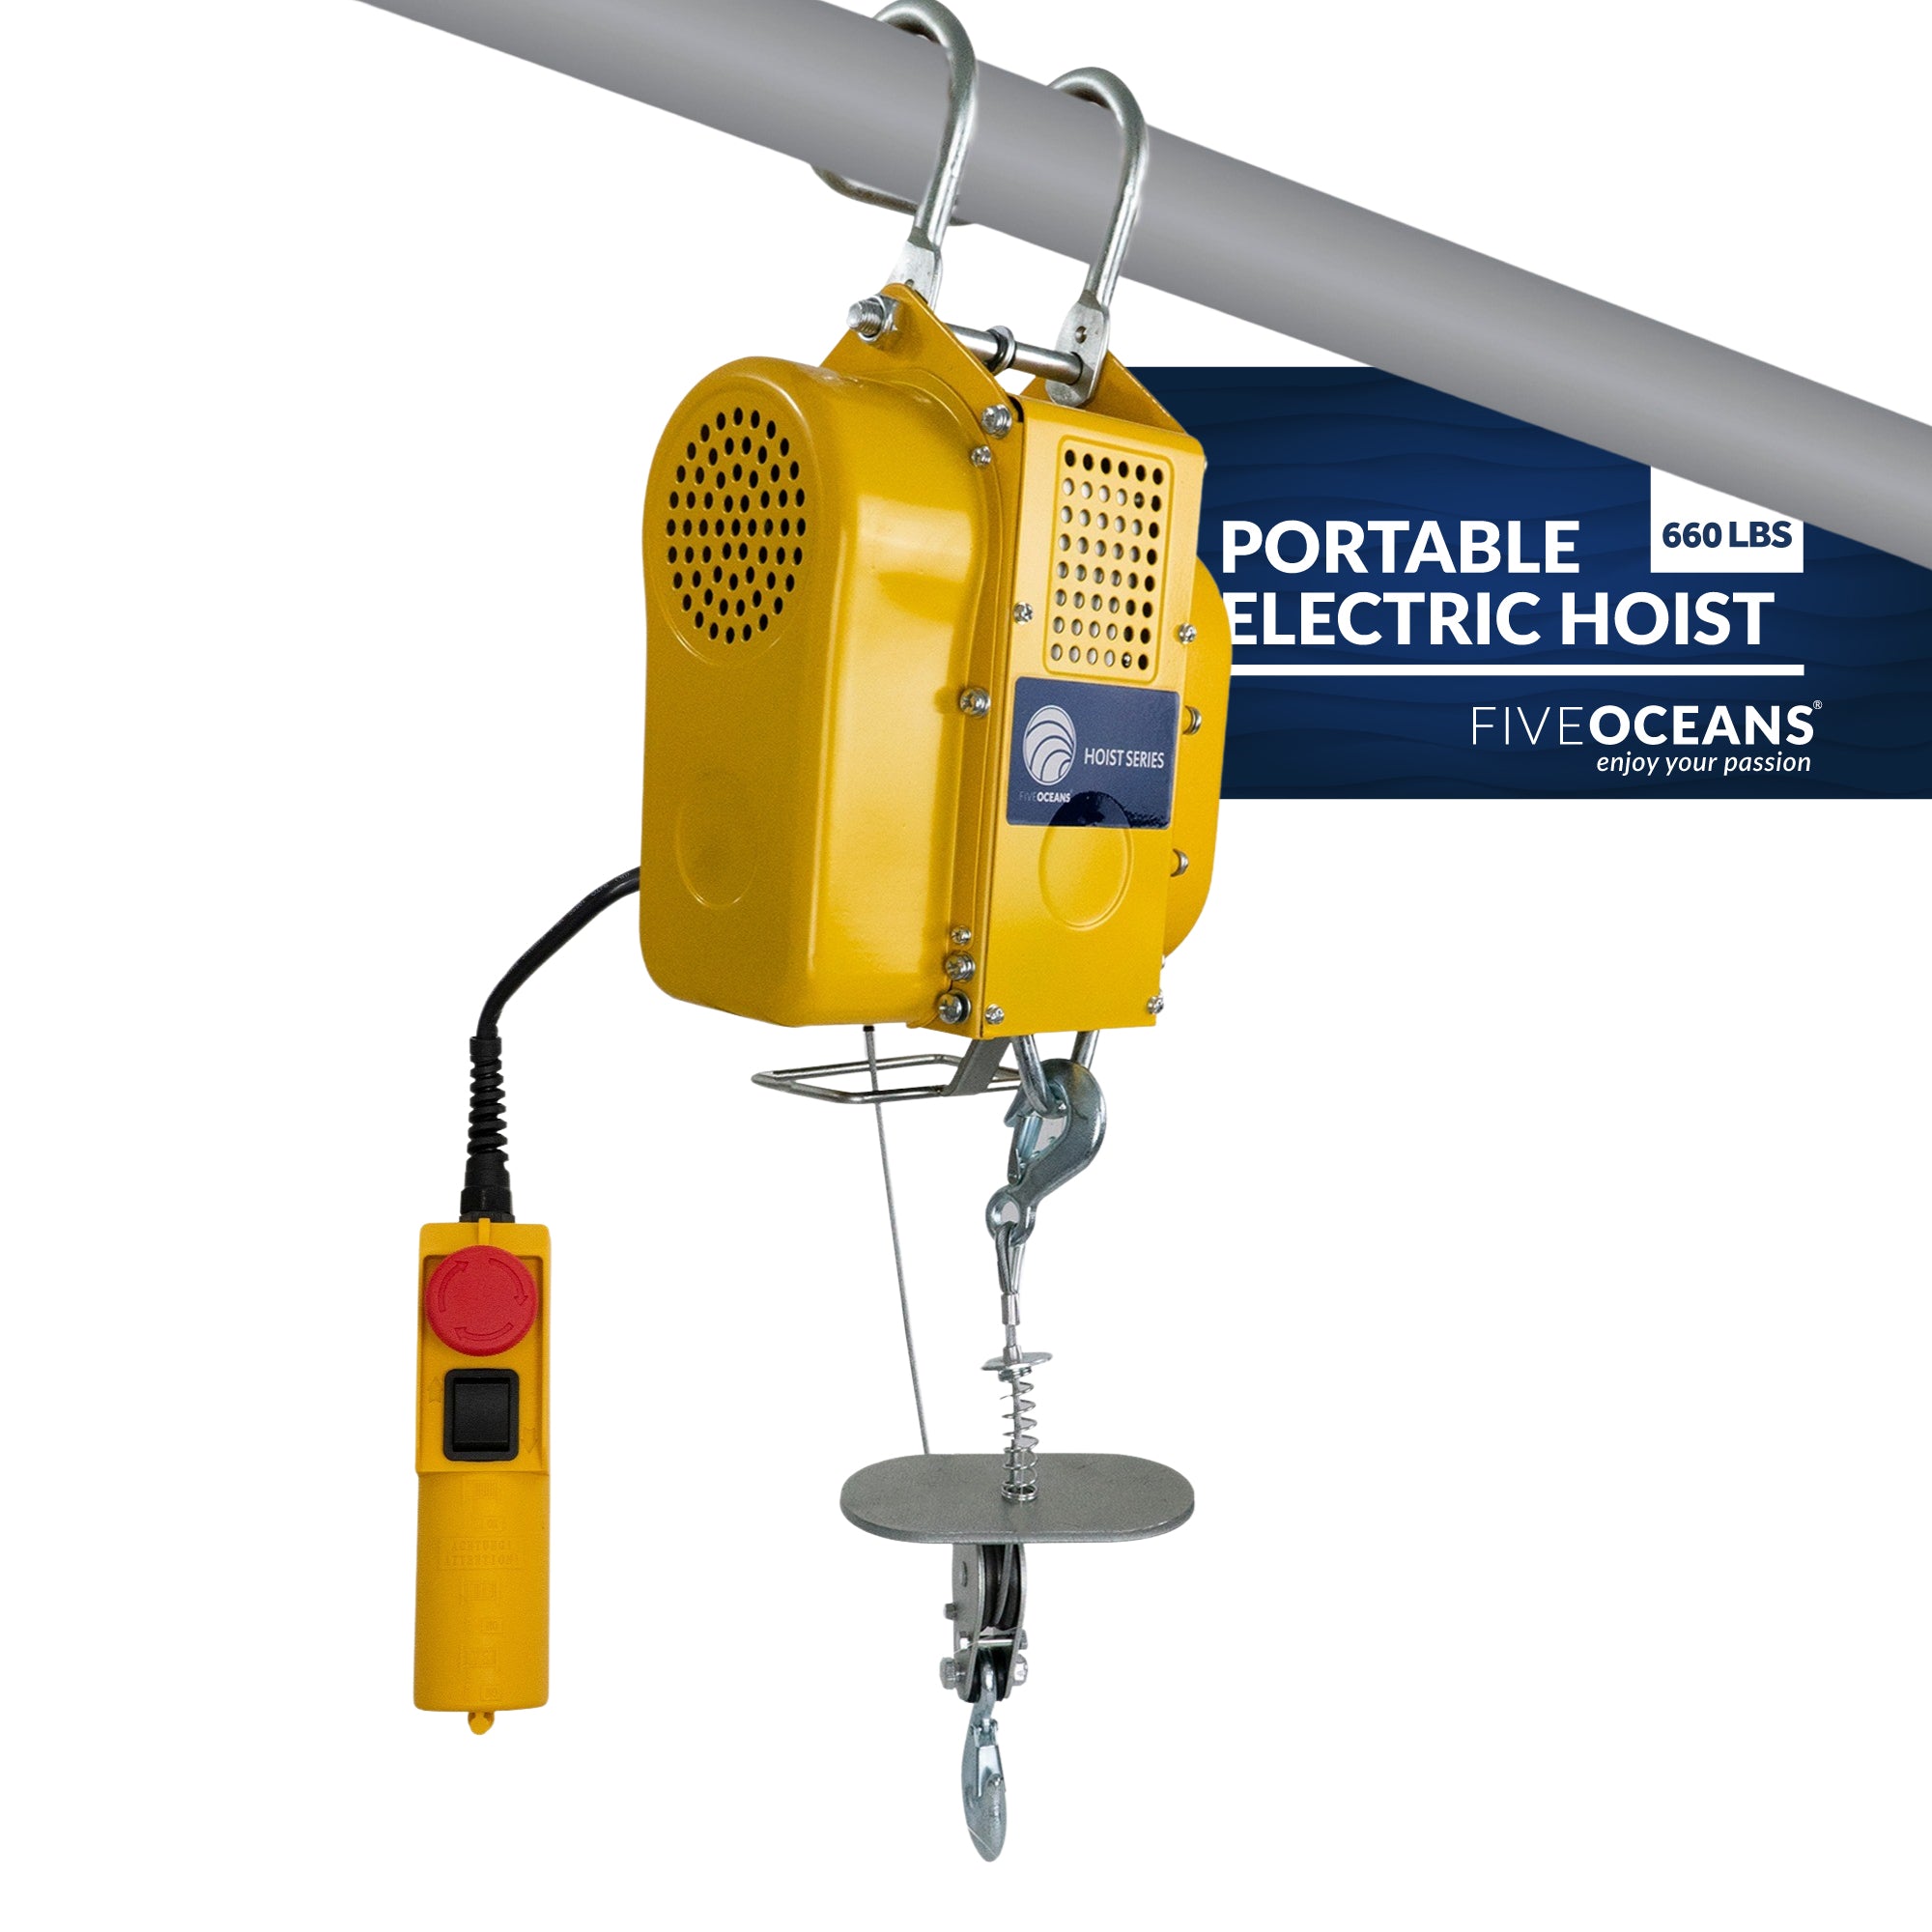 Portable Electric Hoist, Winch, 660 LBS / 300 KG,  6FT Remote Control - FO4336